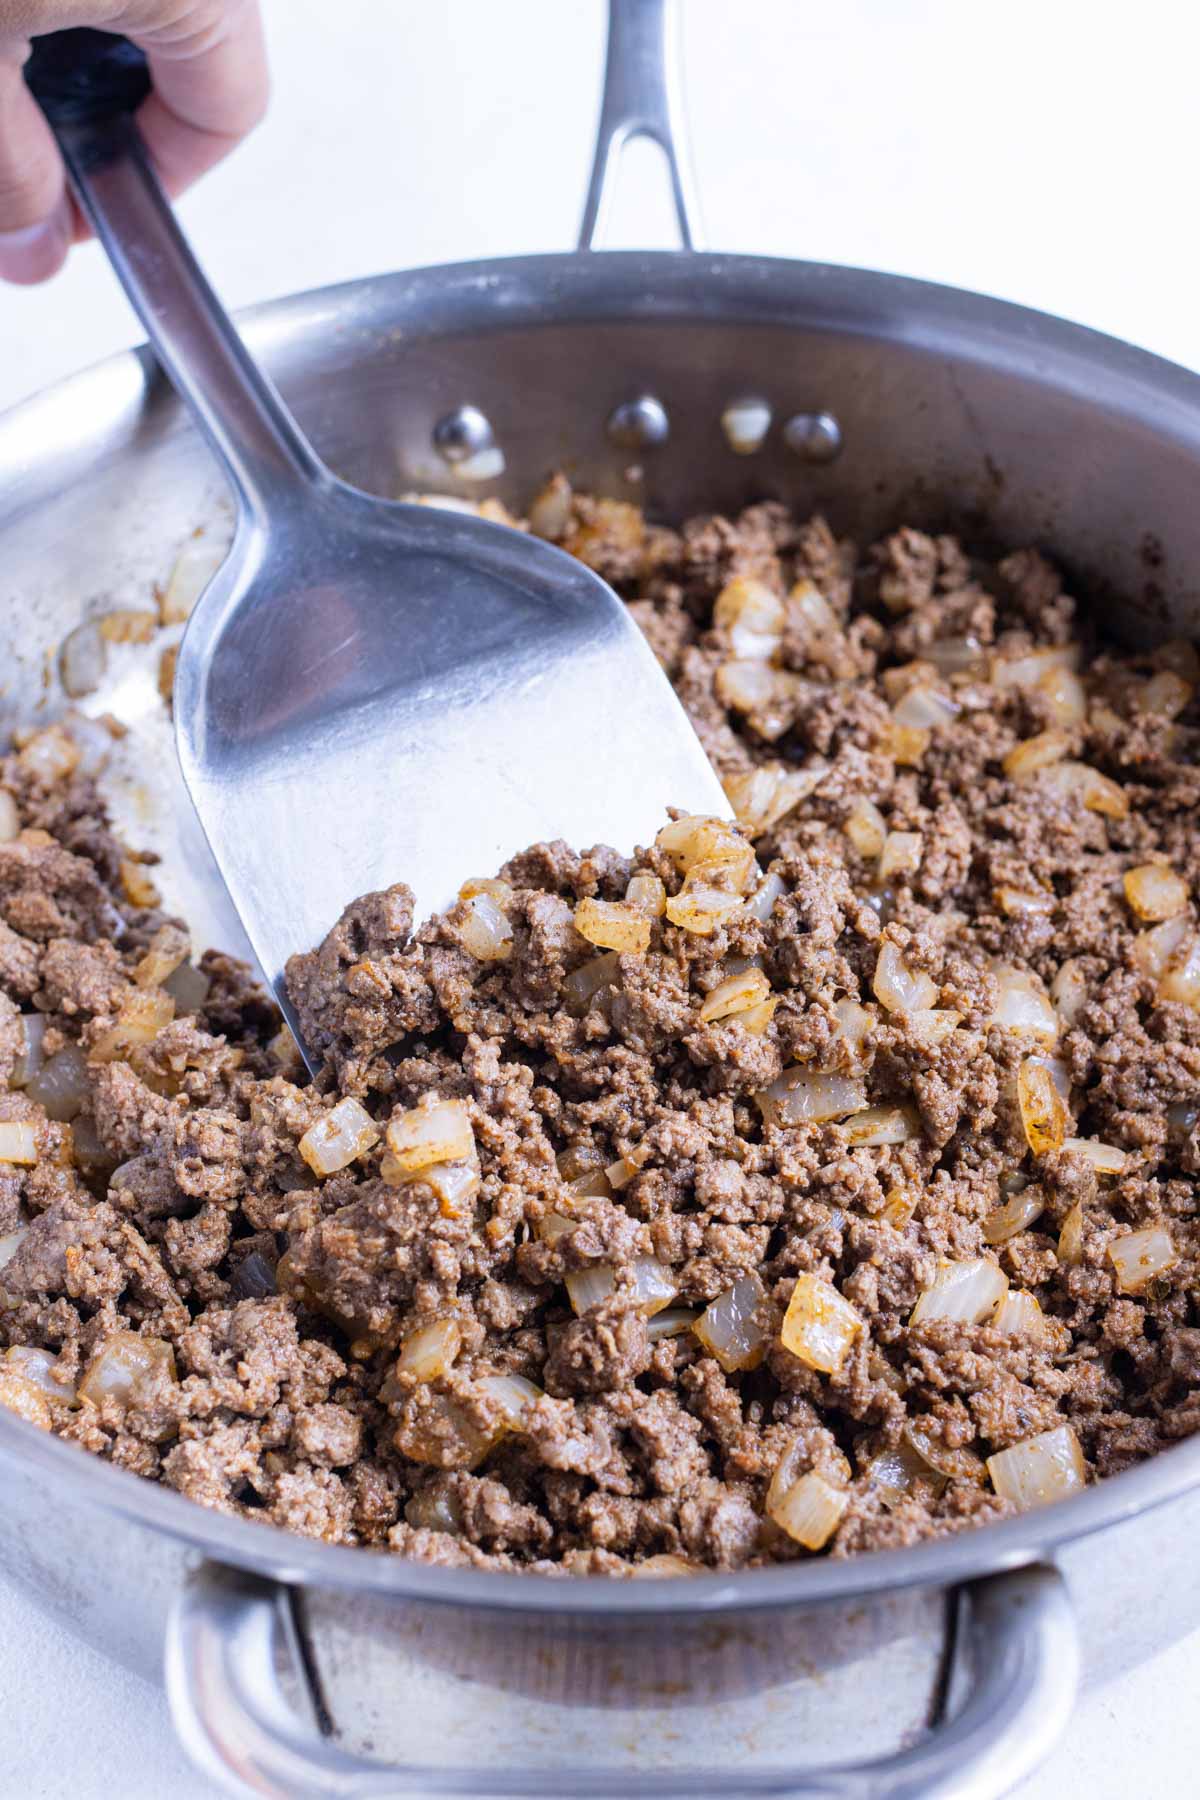 Seasoned ground beef is cooked in a skillet.